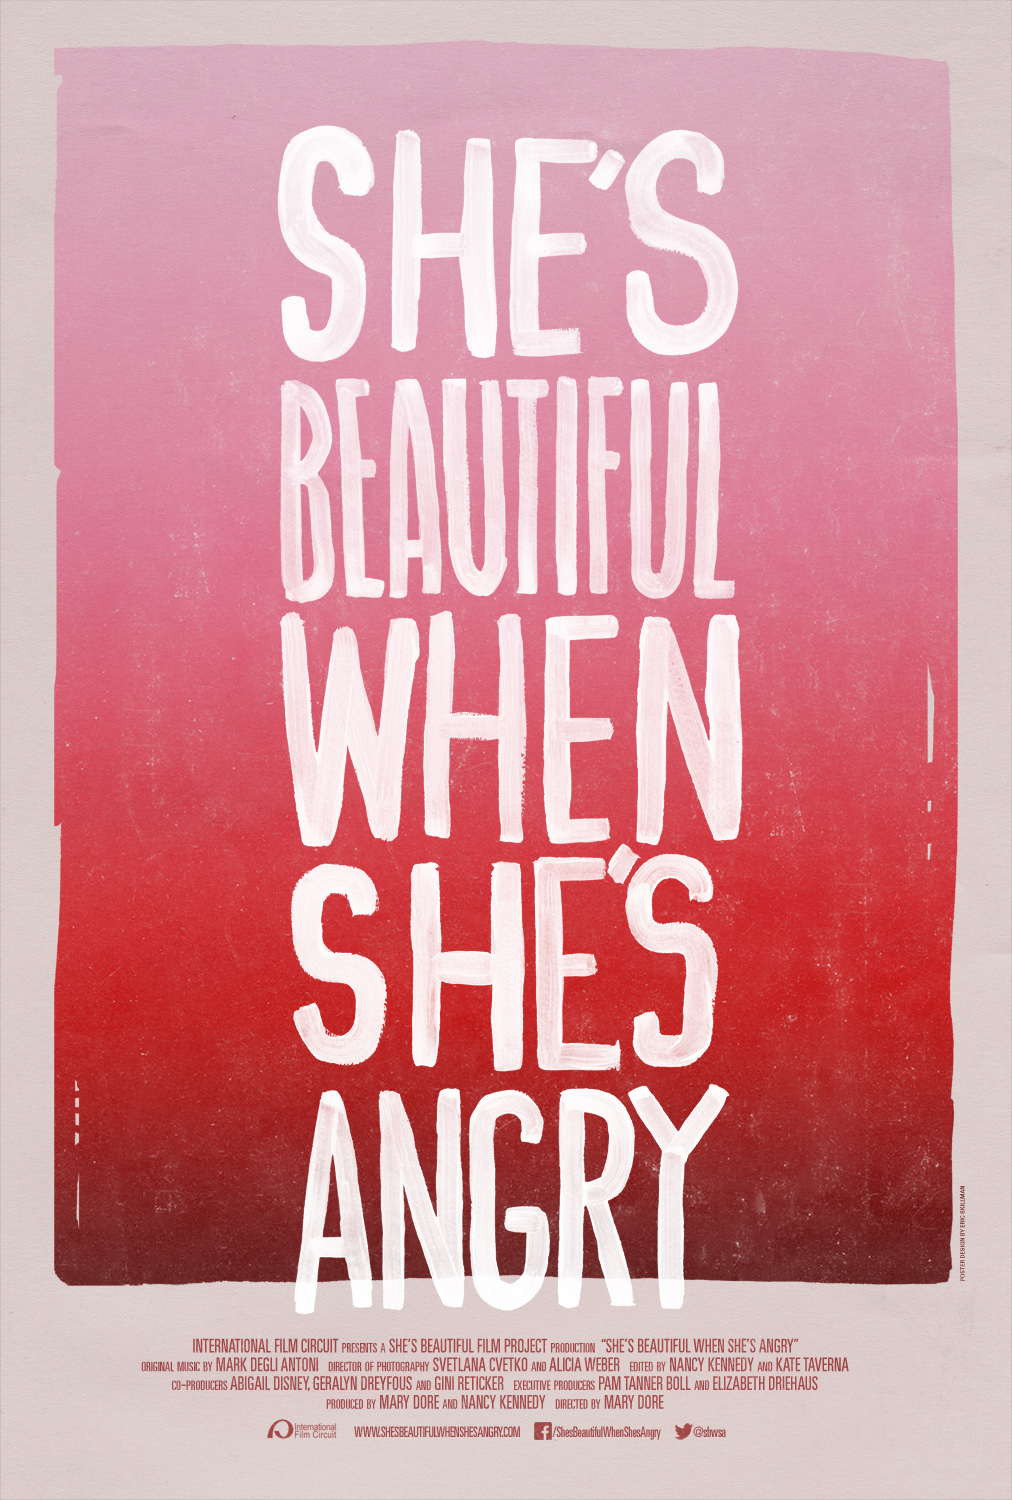 Film: She’s Beautiful When She’s Angry